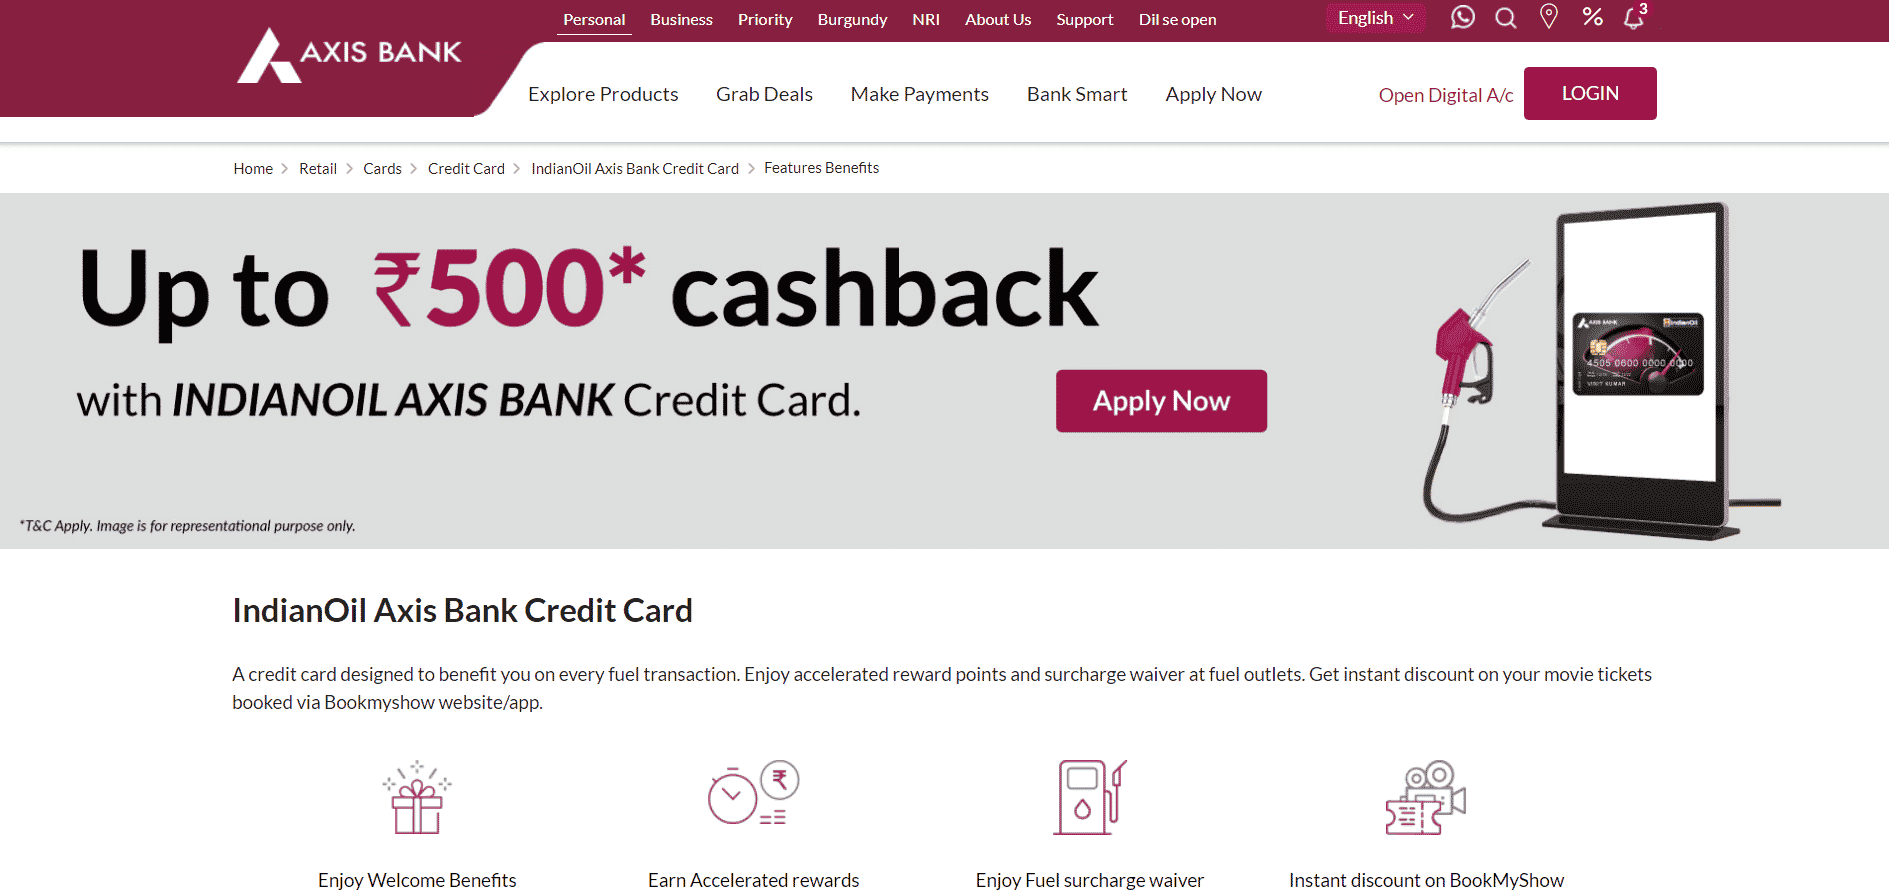 Indian Oil Axis Bank Credit Card | Best Credit Card in India 2022